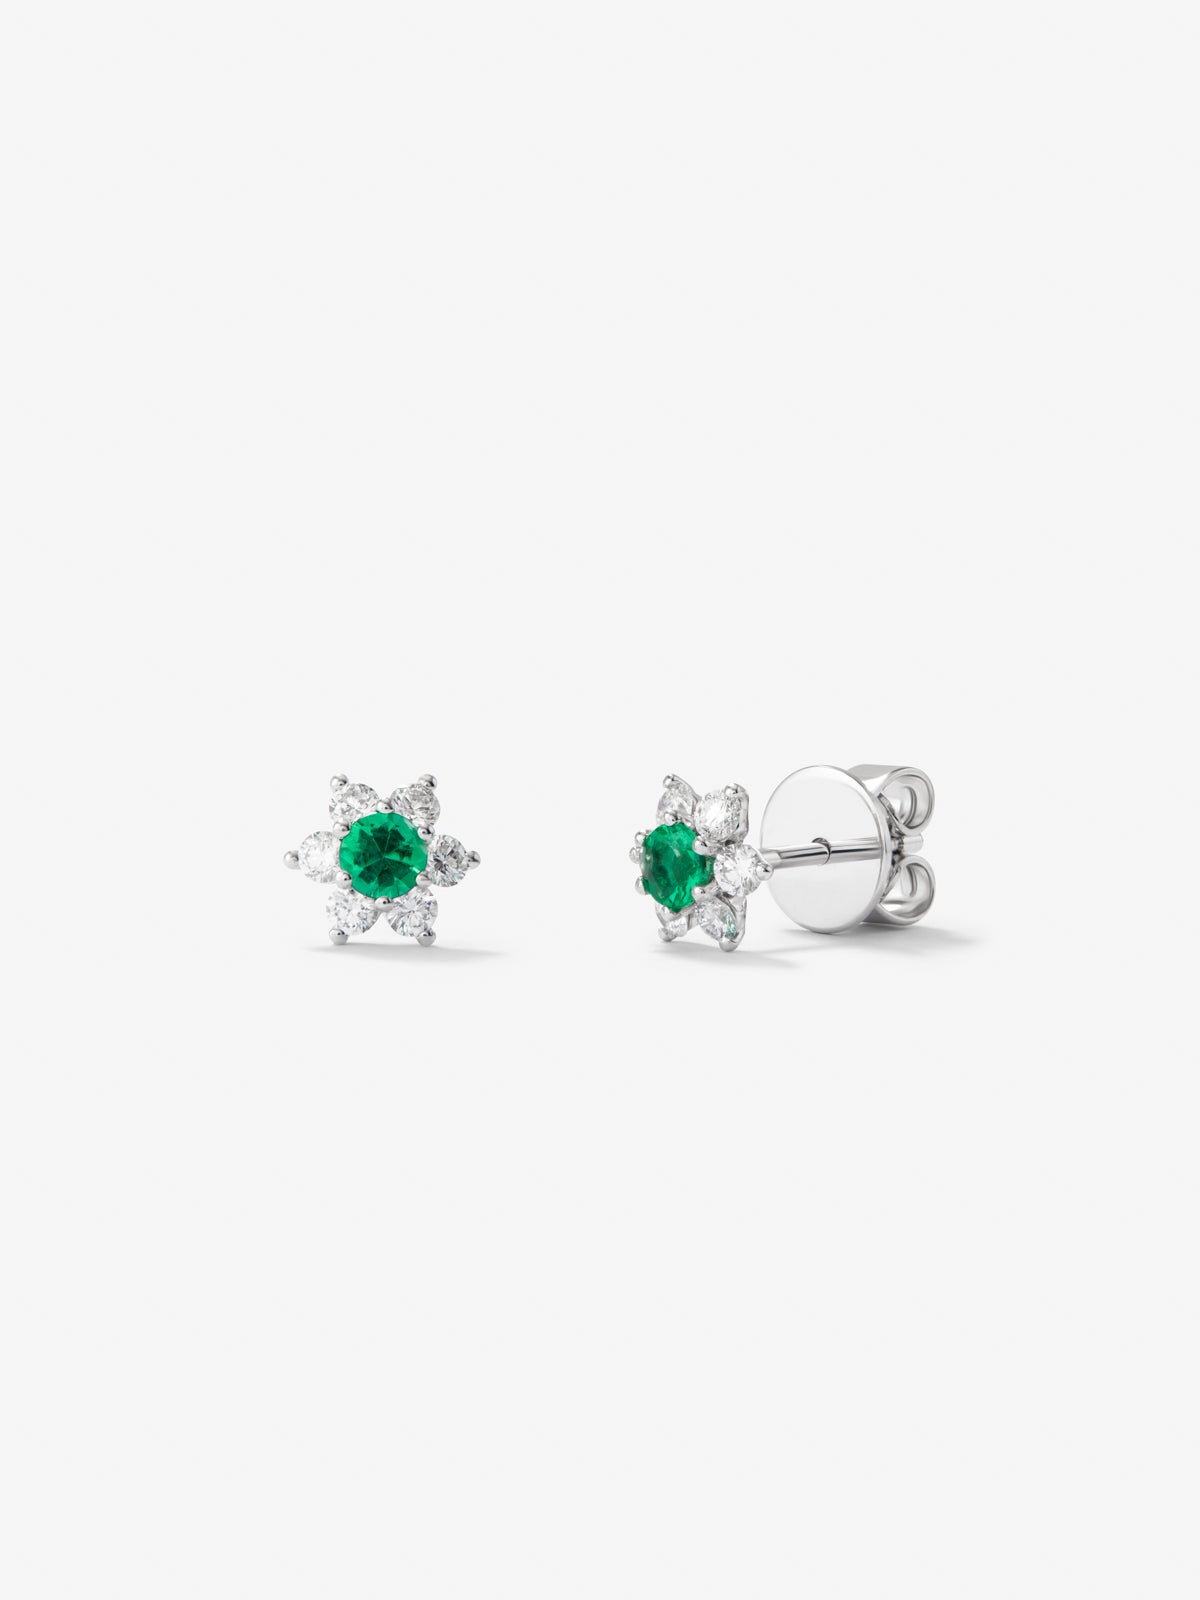 18K white gold earrings with 2 brilliant-cut emeralds with a total of 0.19 cts and 12 brilliant-cut diamonds with a total of 0.28 cts